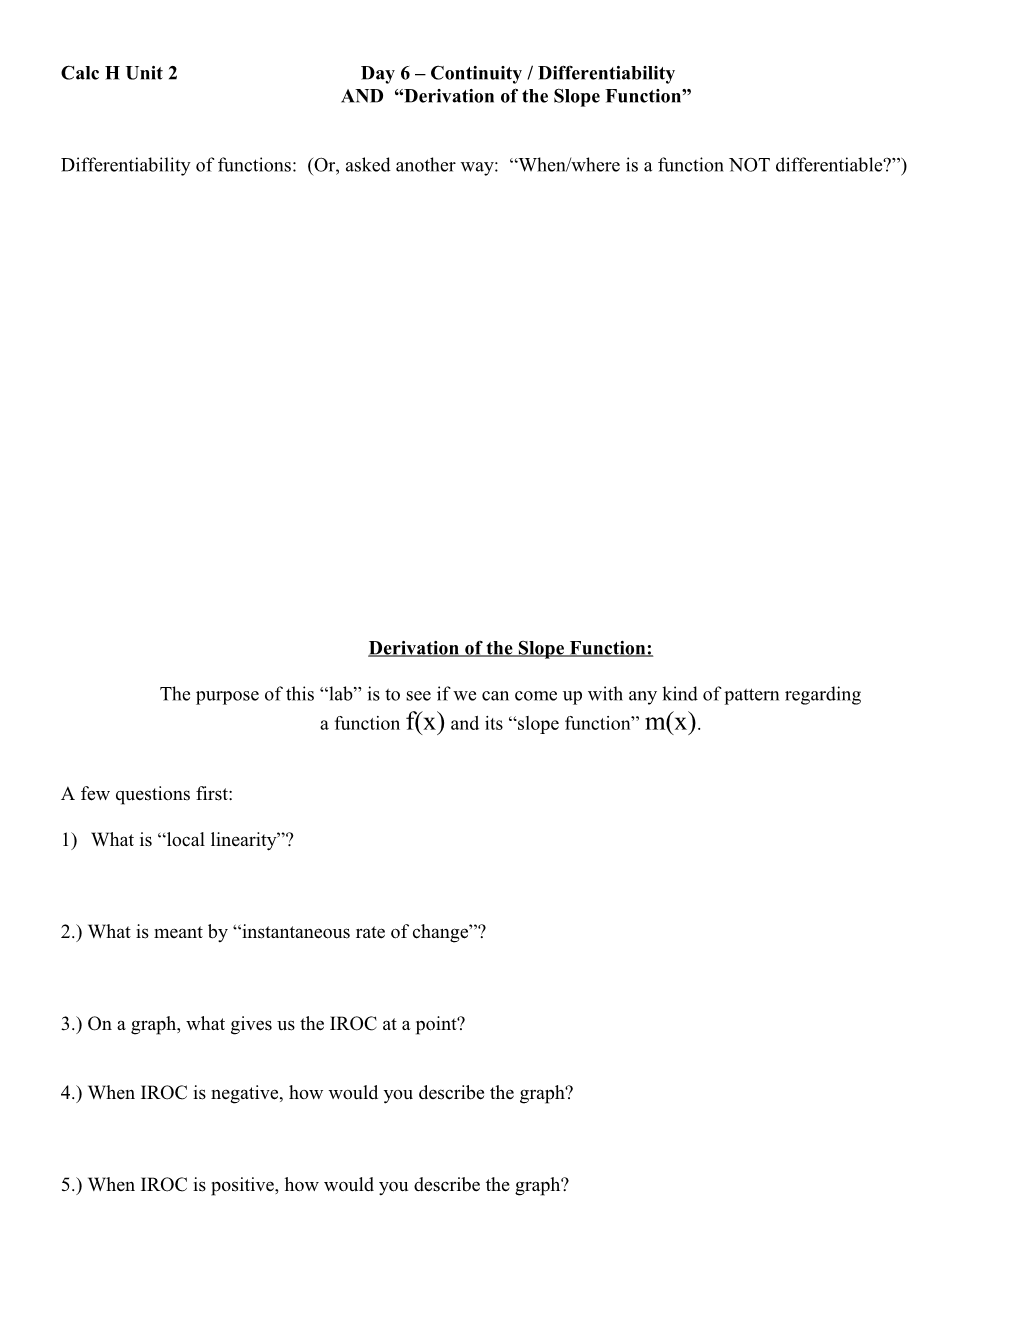 Lab Derivation of the Slope Function